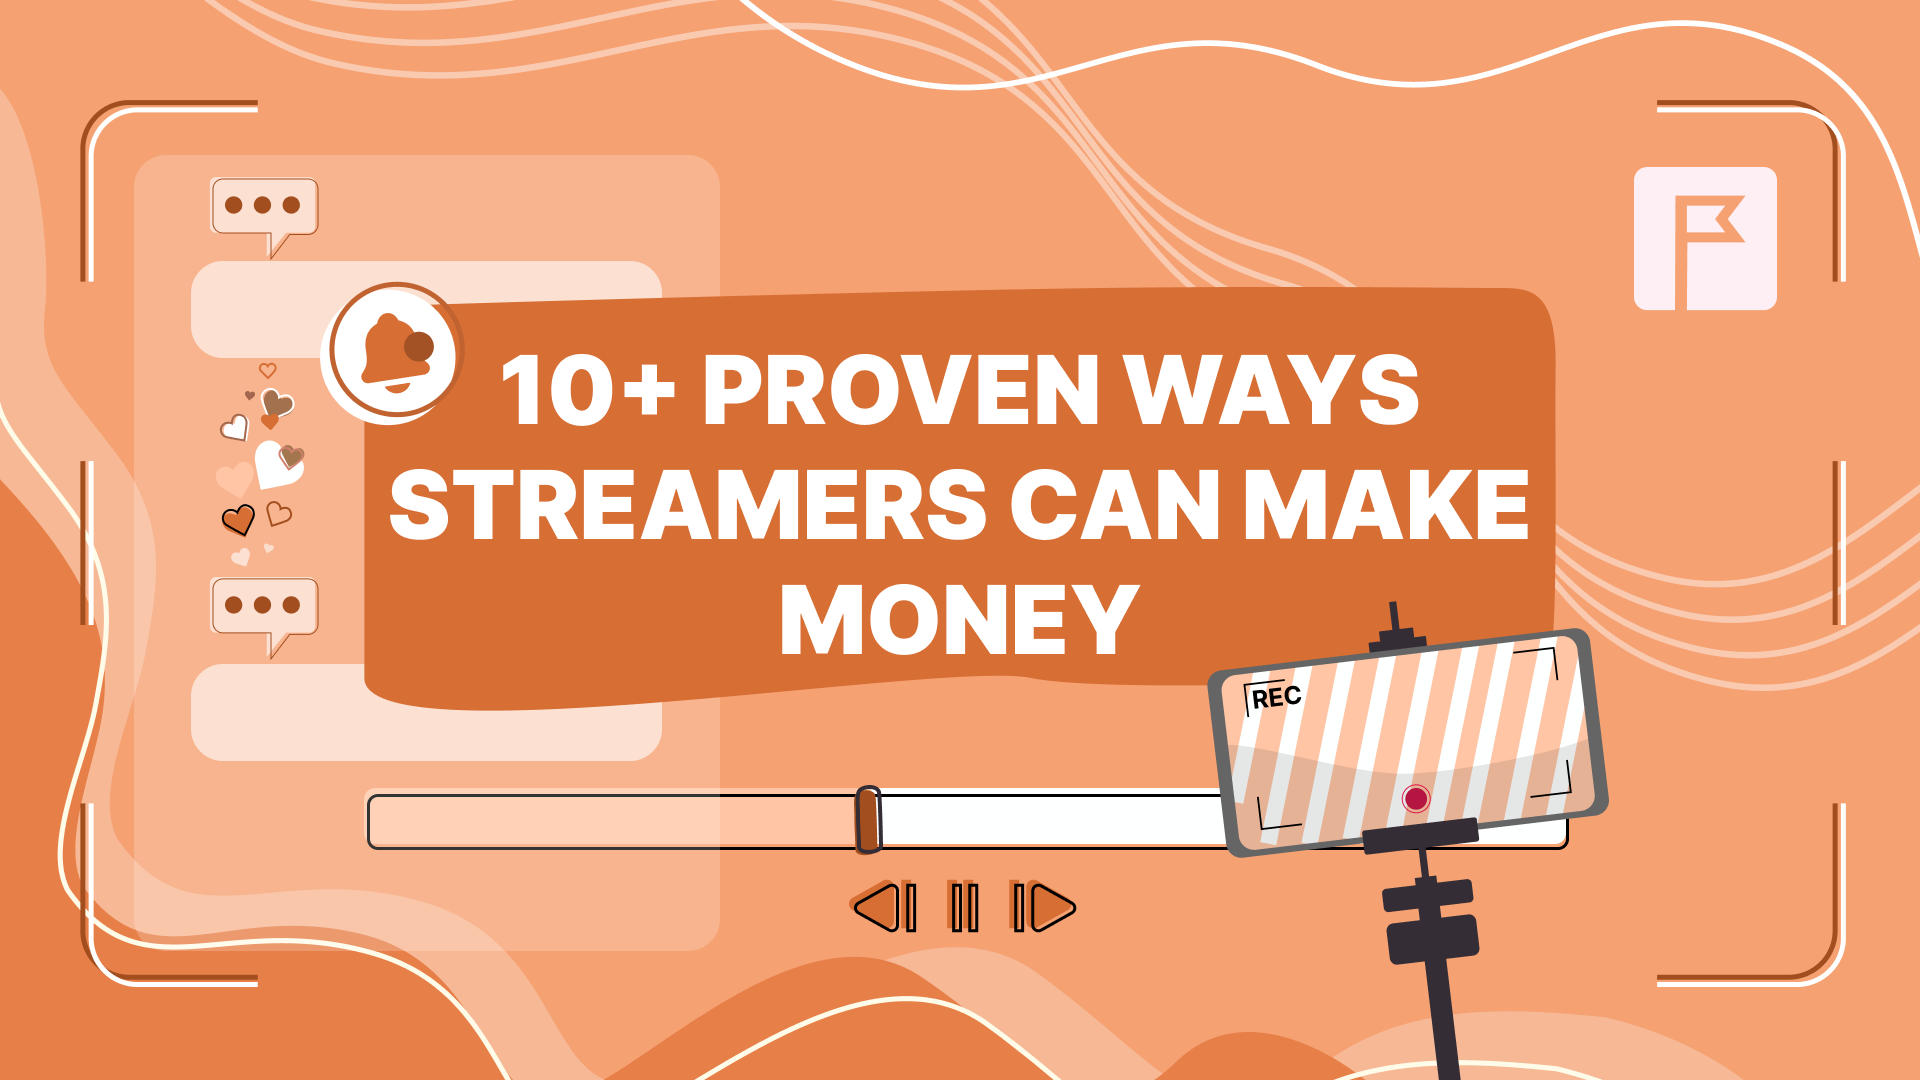 10+ Proven Ways Streamers Can Make Money